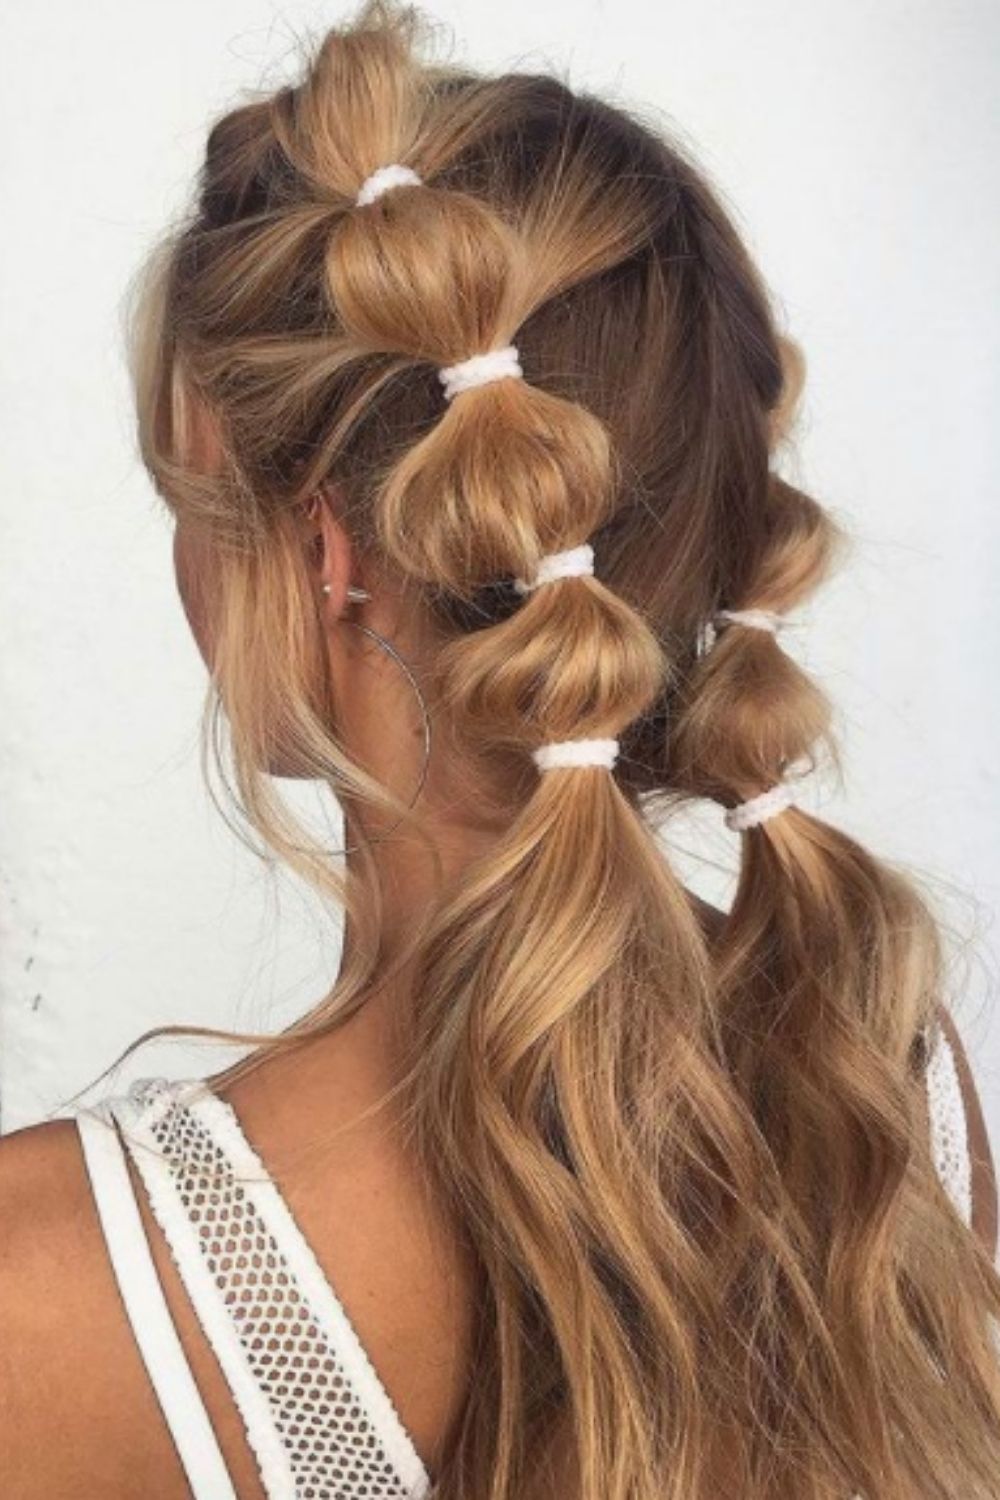 What is homecoming hairstyles updo with braids?